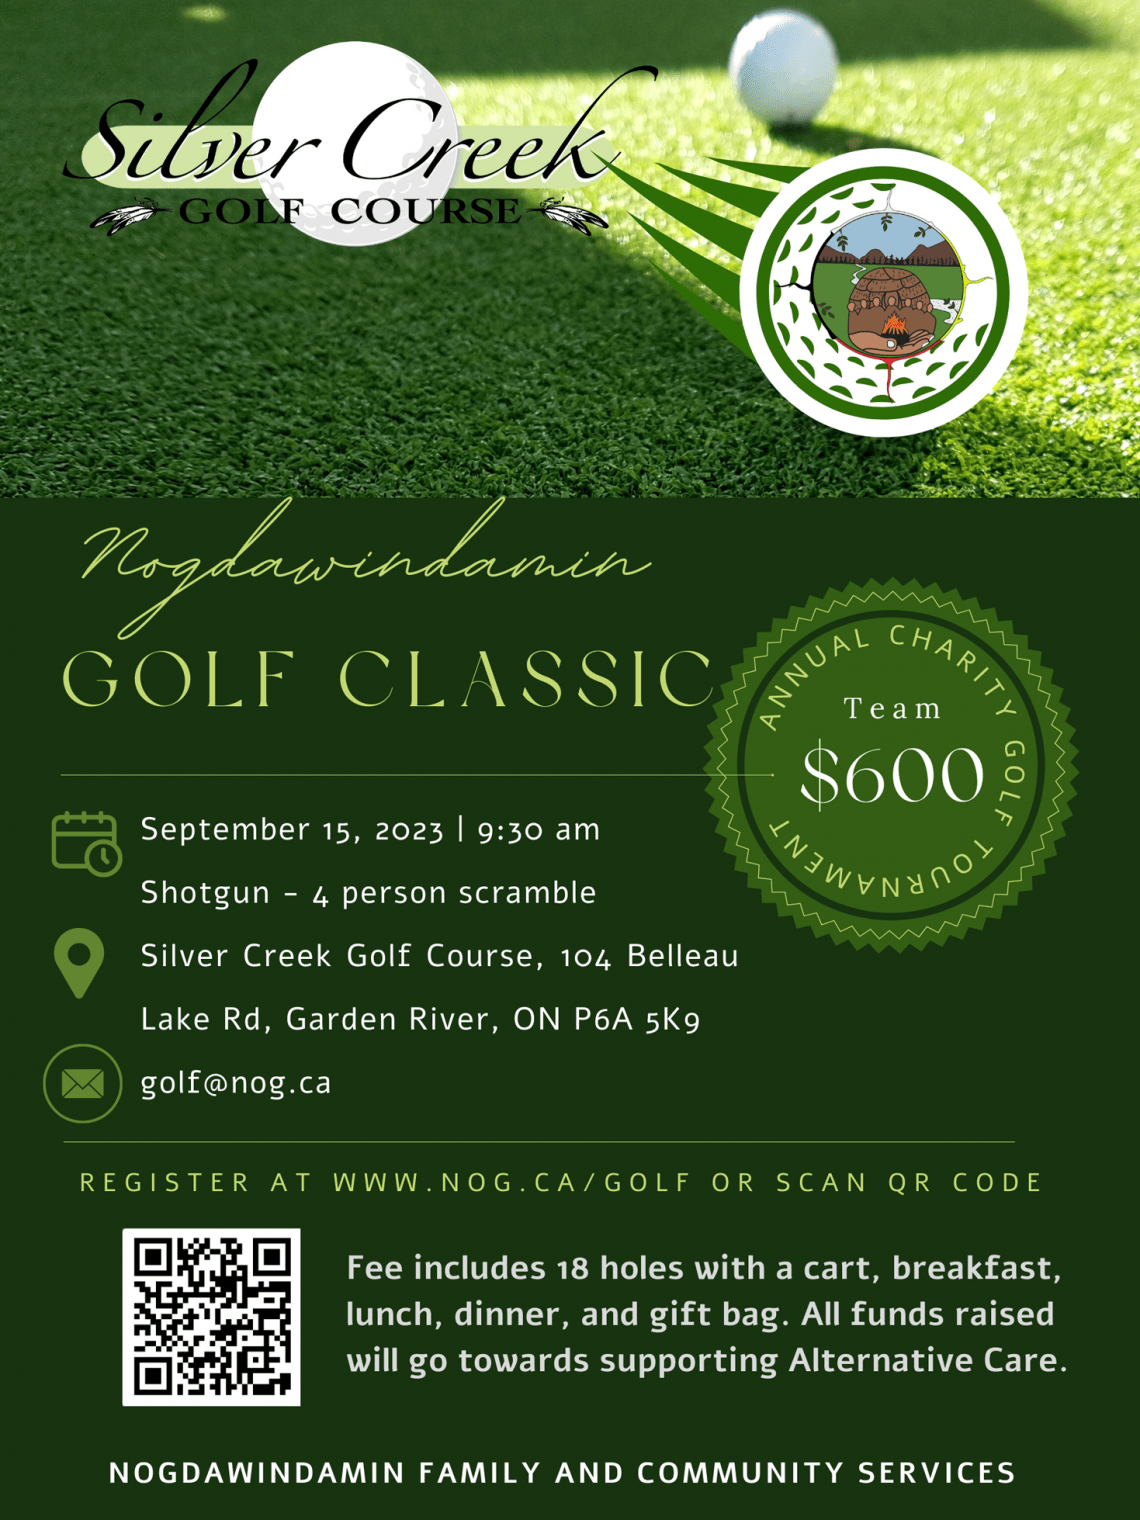 Register for the Annual Golf Classic